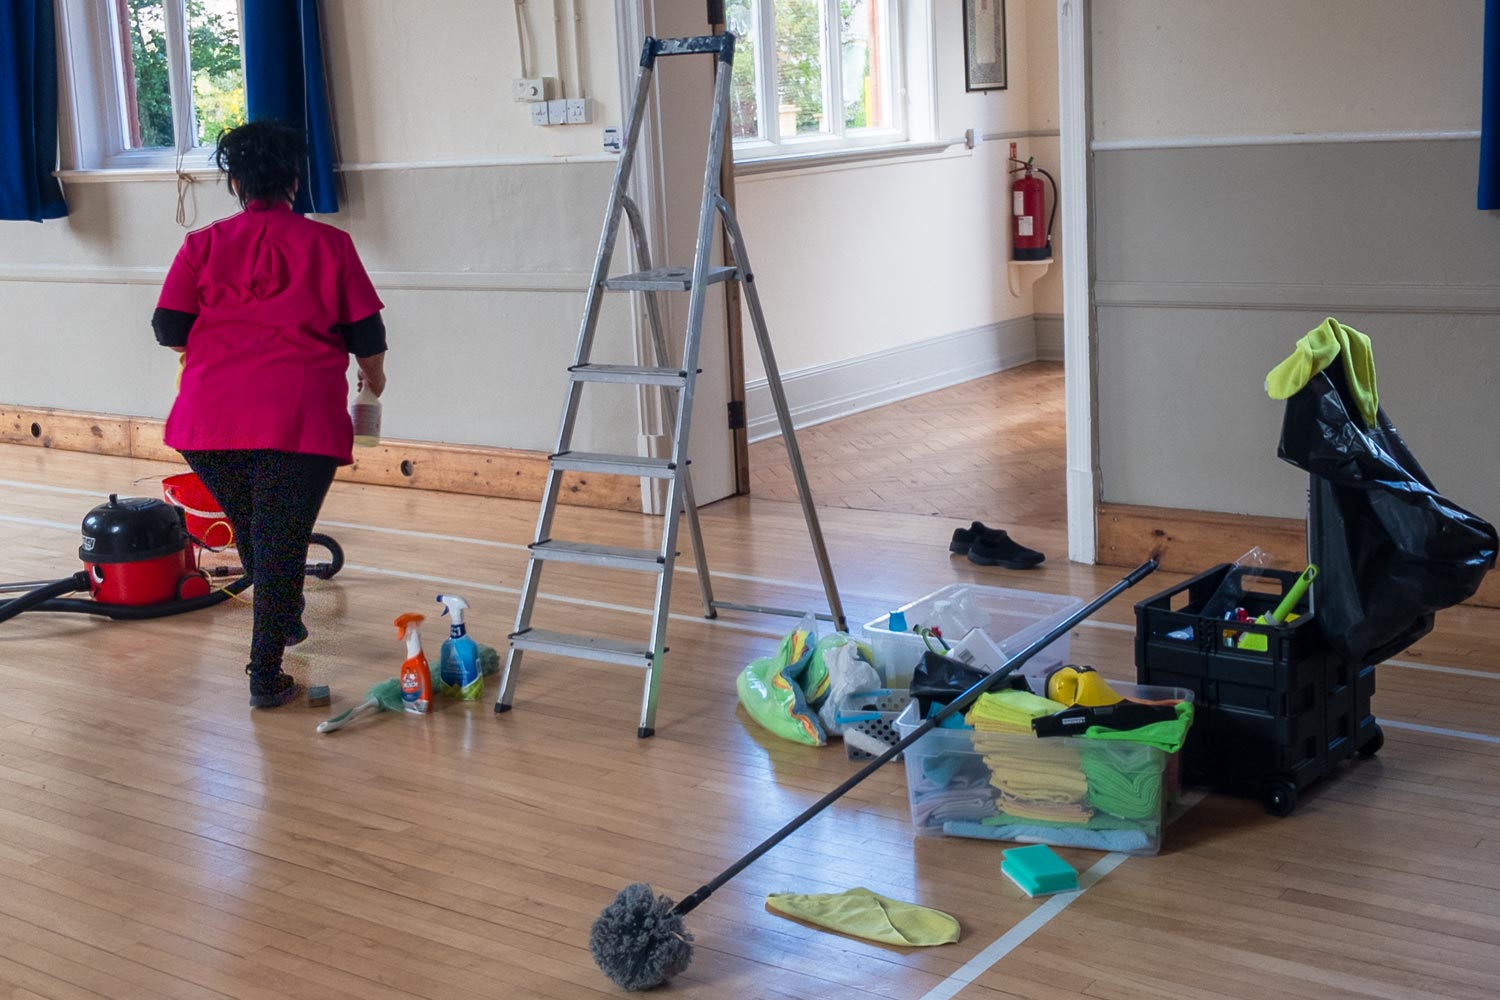 Covid-19 secure cleaning at Dumbleton Village Hall